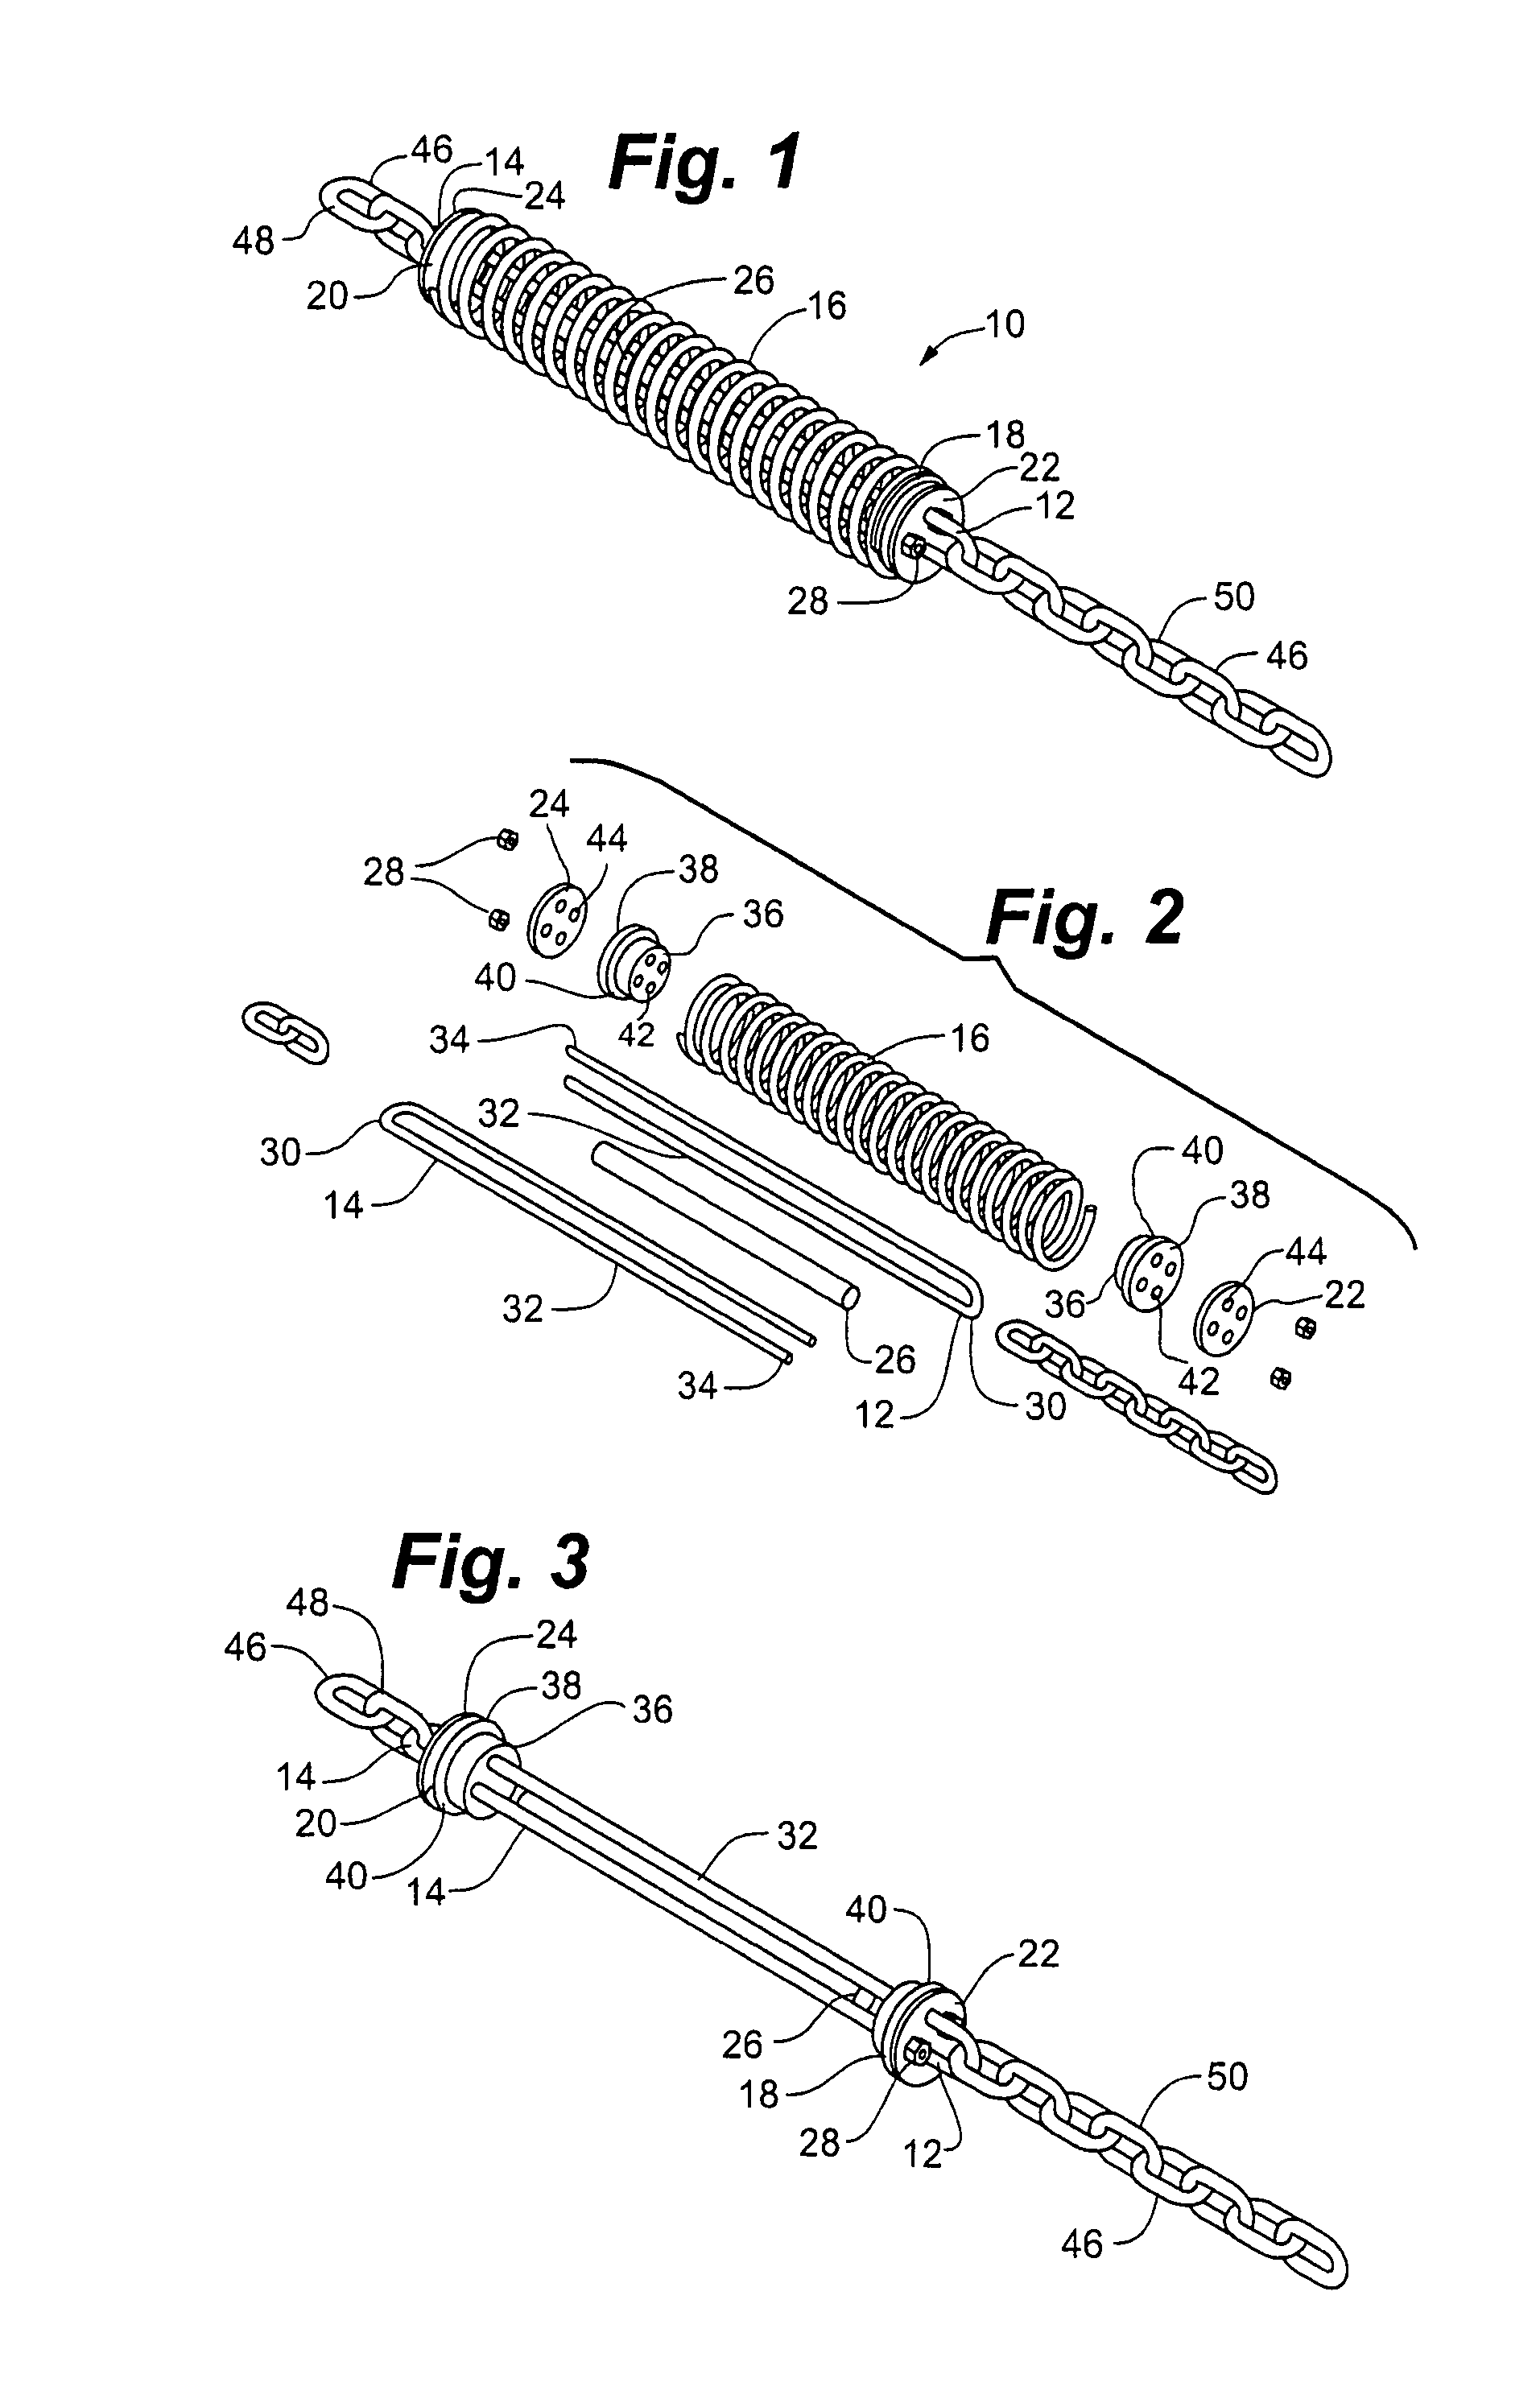 Damping spring for use in agricultural implements